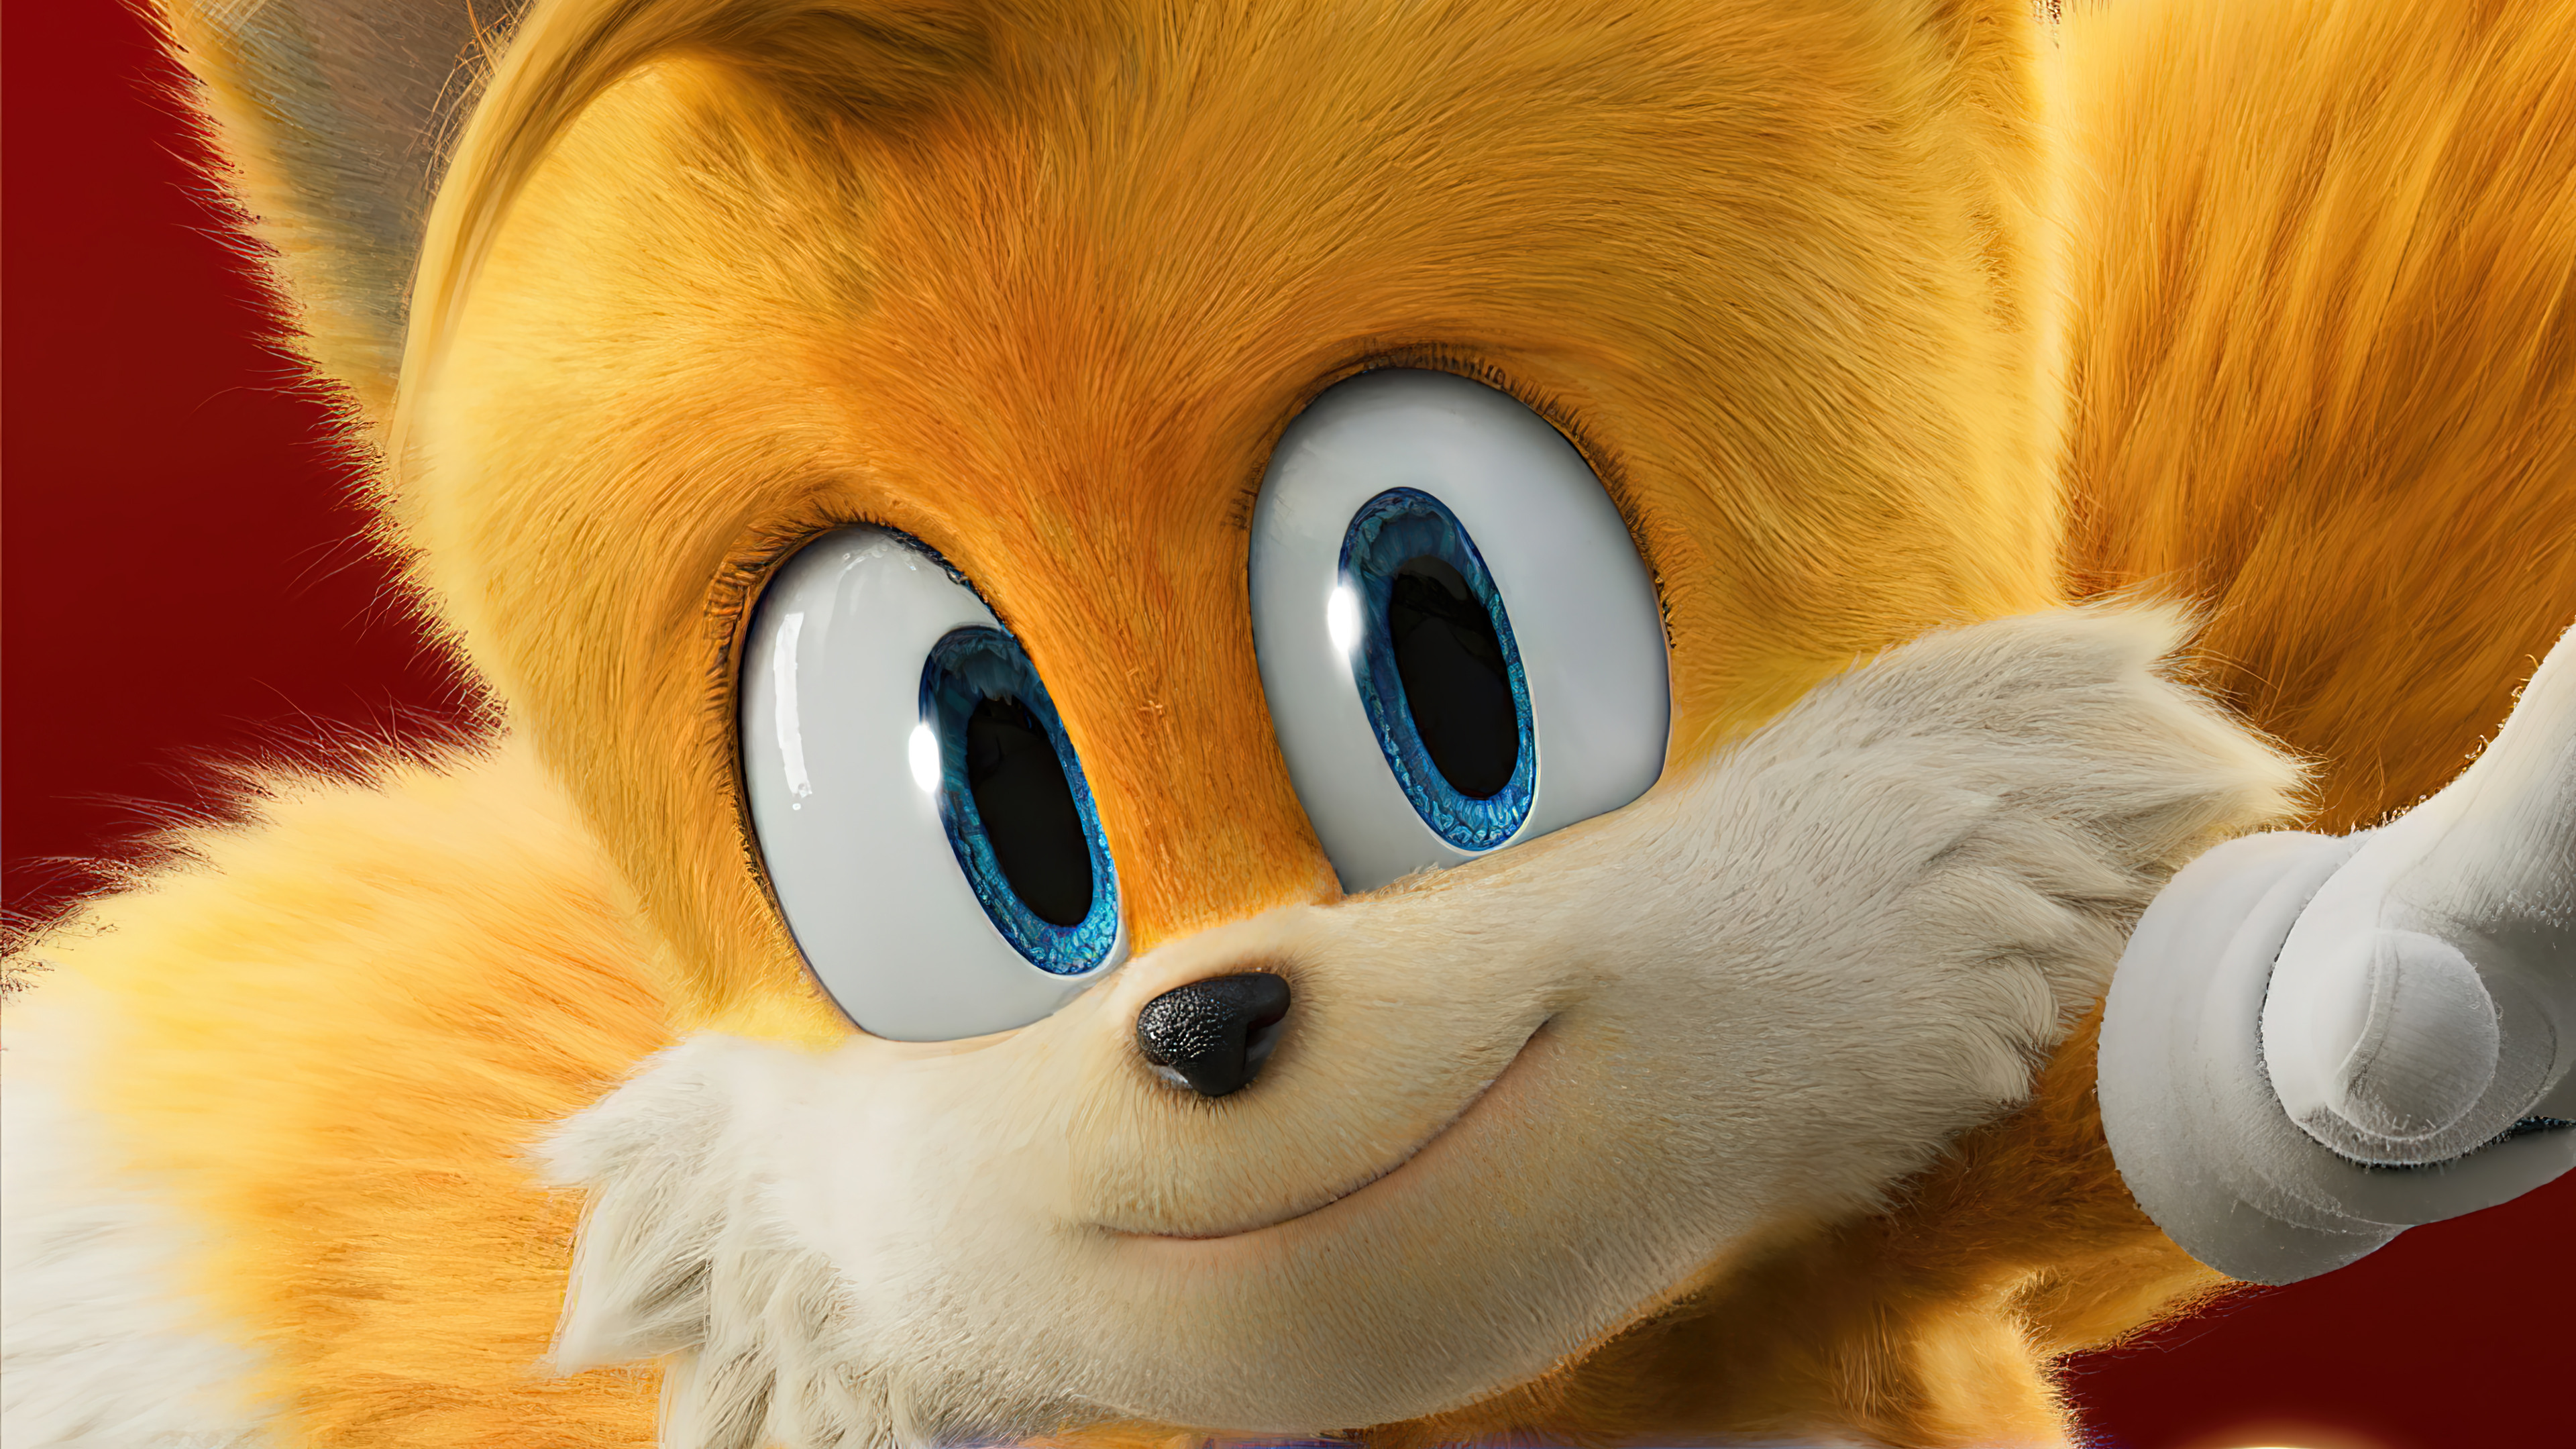 Tails Doll Wallpapers - Wallpaper Cave